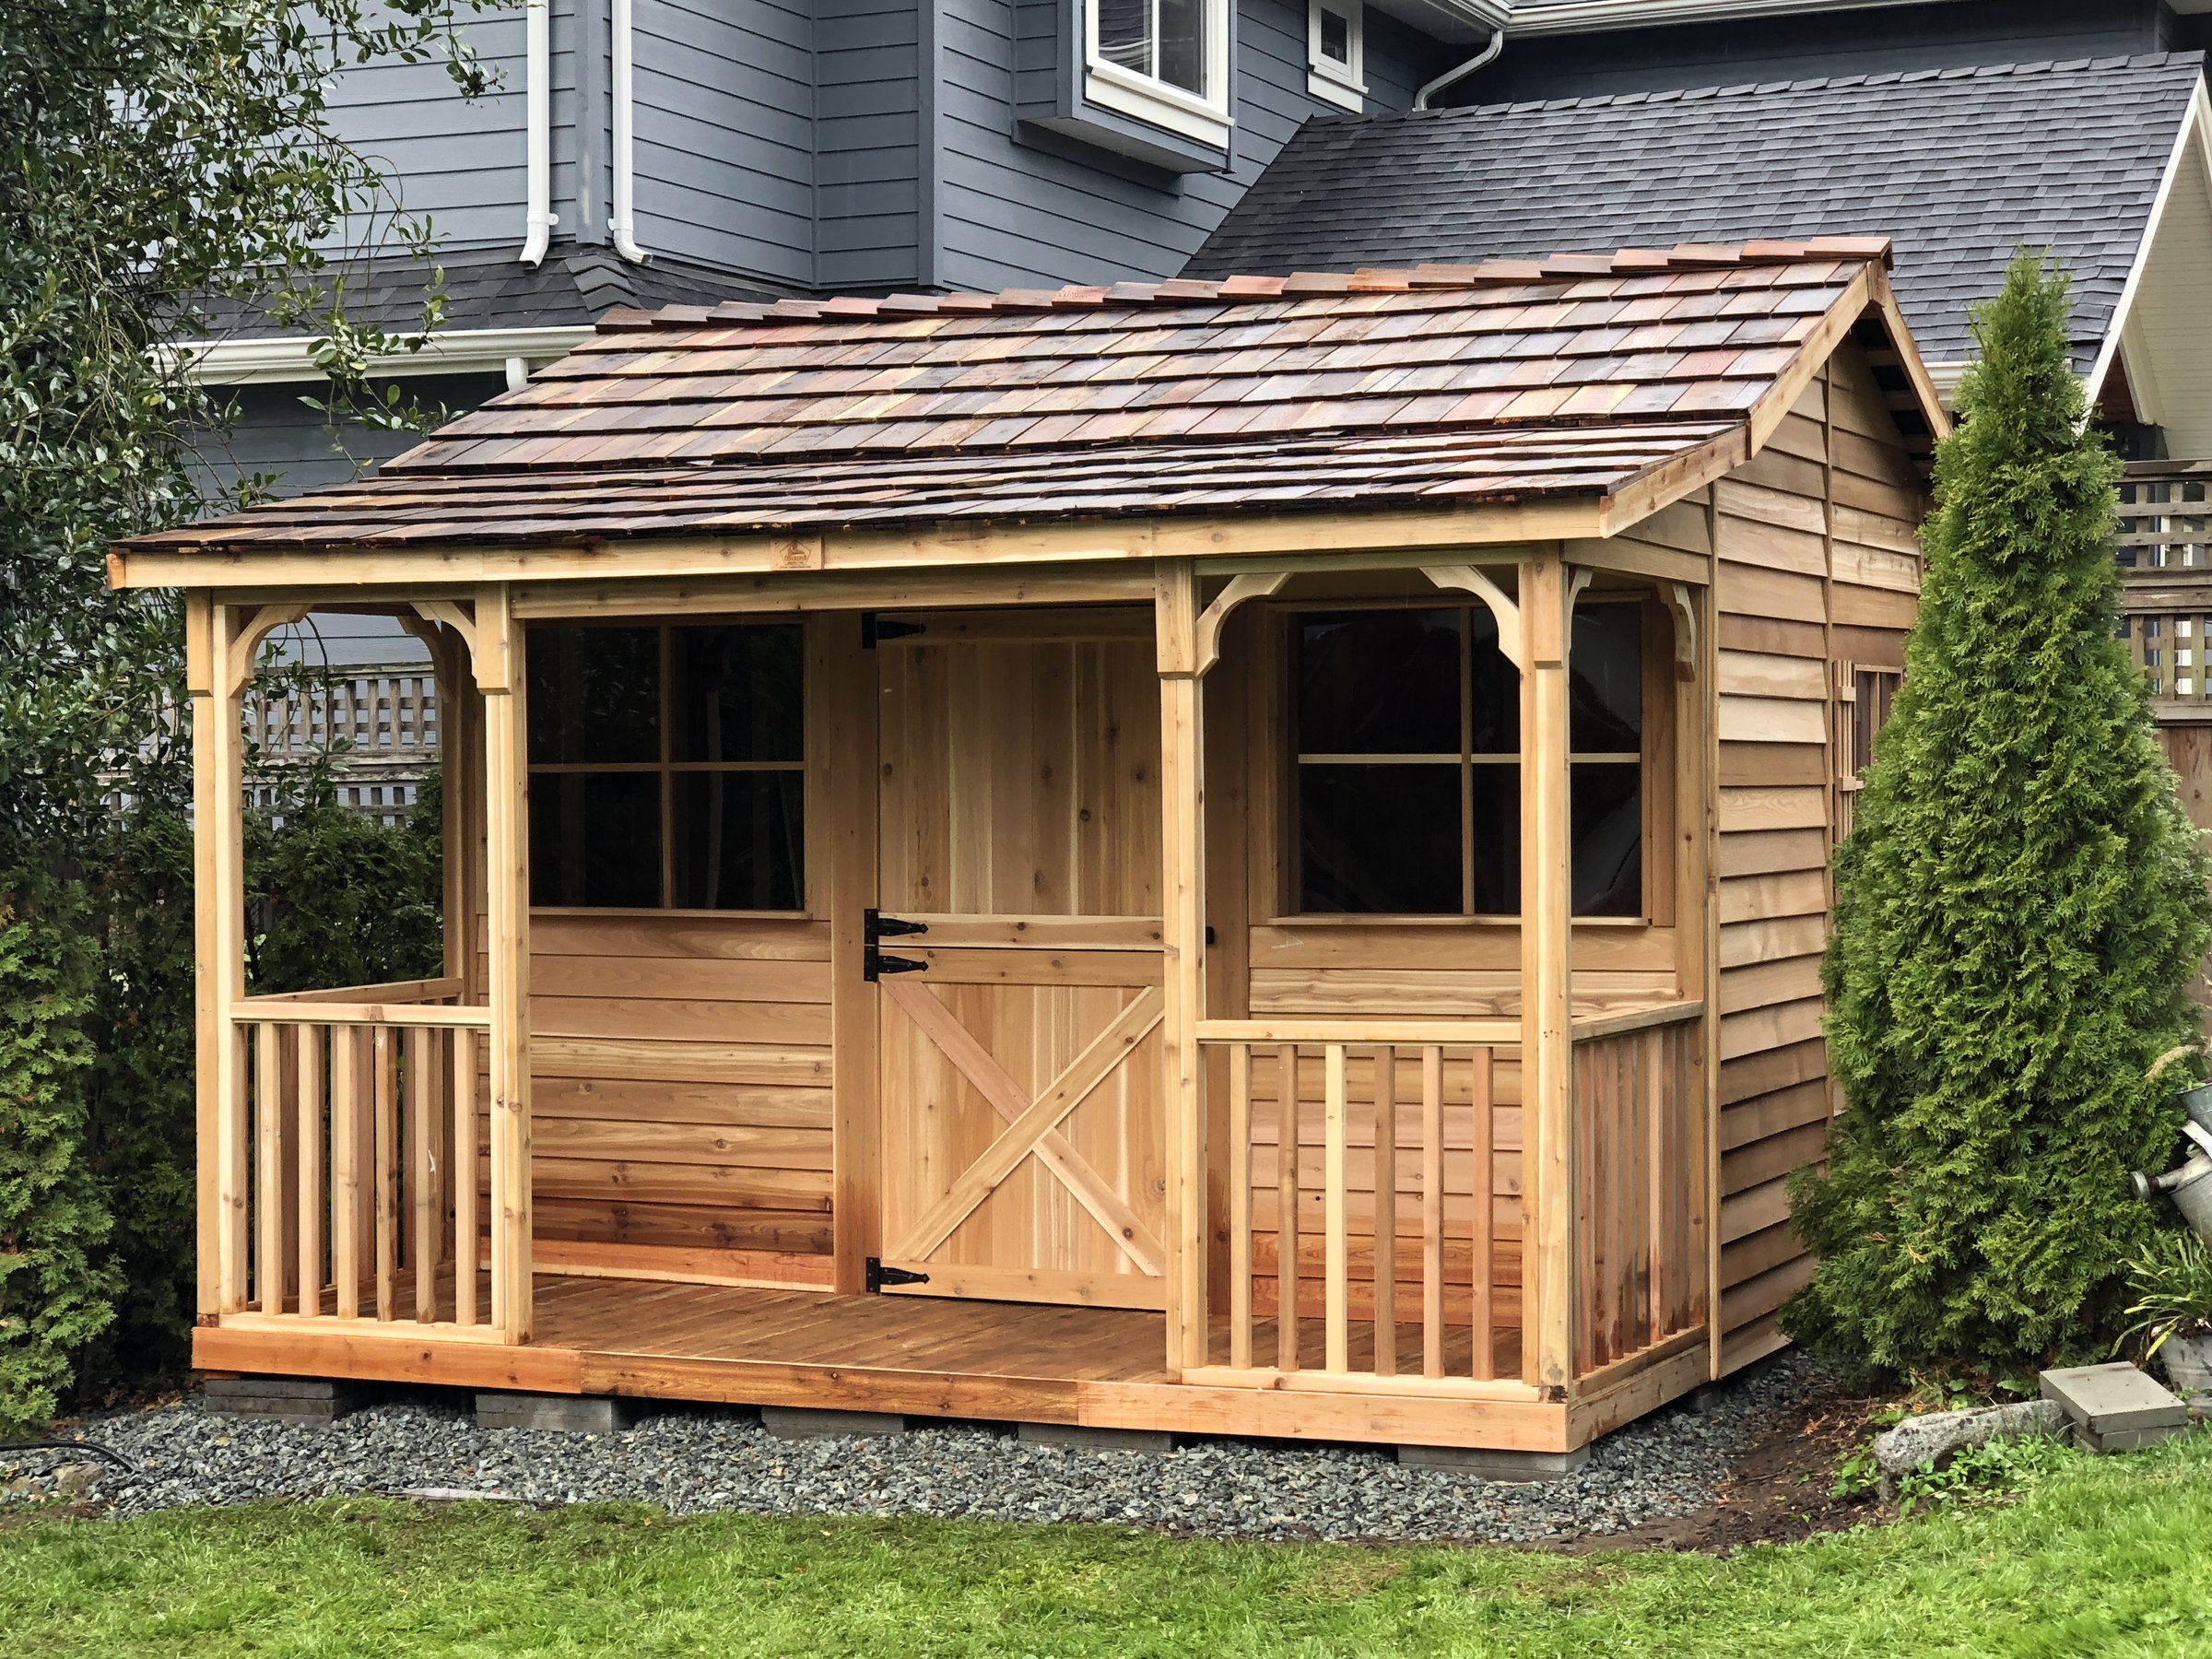 Cedarshed Bunkhouse Garden Shed Playhouse in 3 Sizes - image 2 of 2